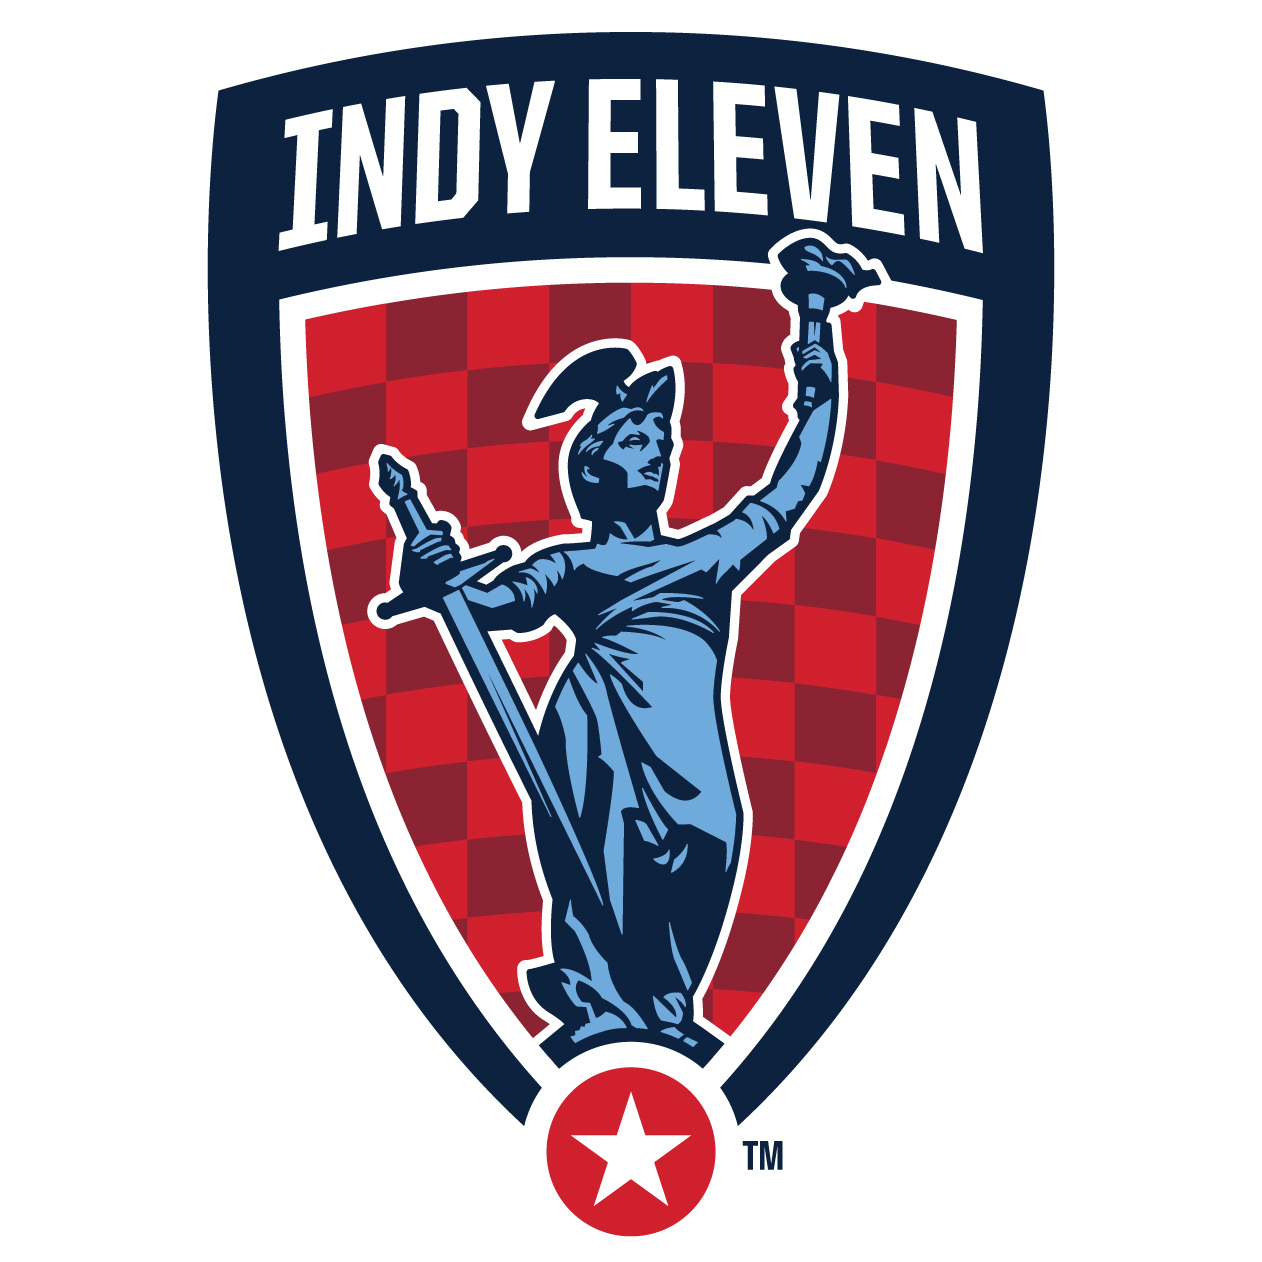 Indy Eleven logo (opens in new window)